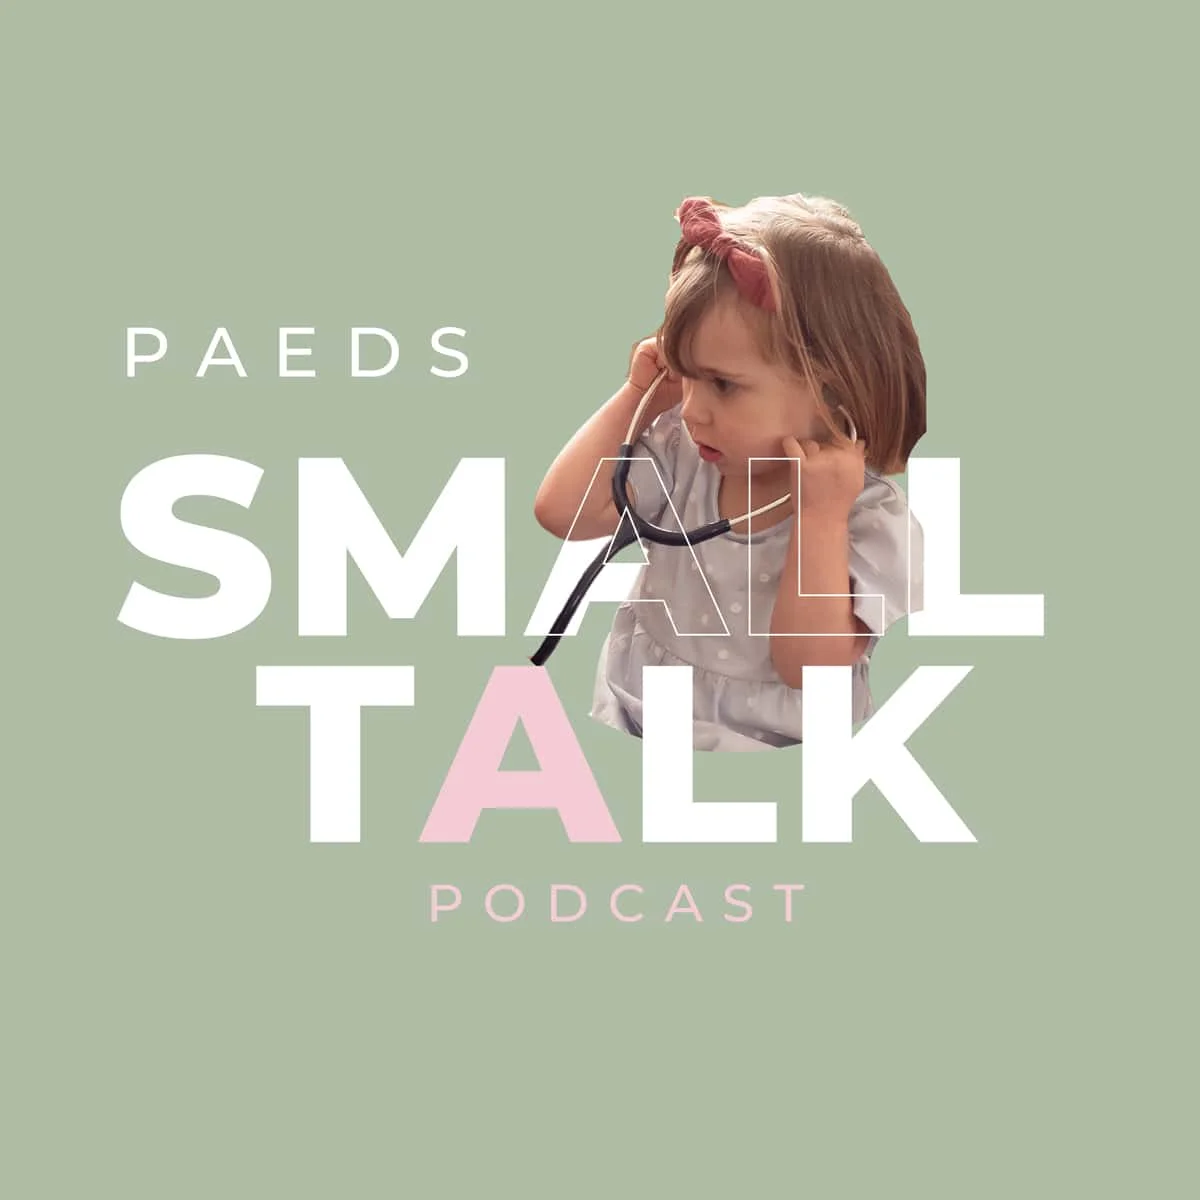 Small Talk Podcast - Paeds Education